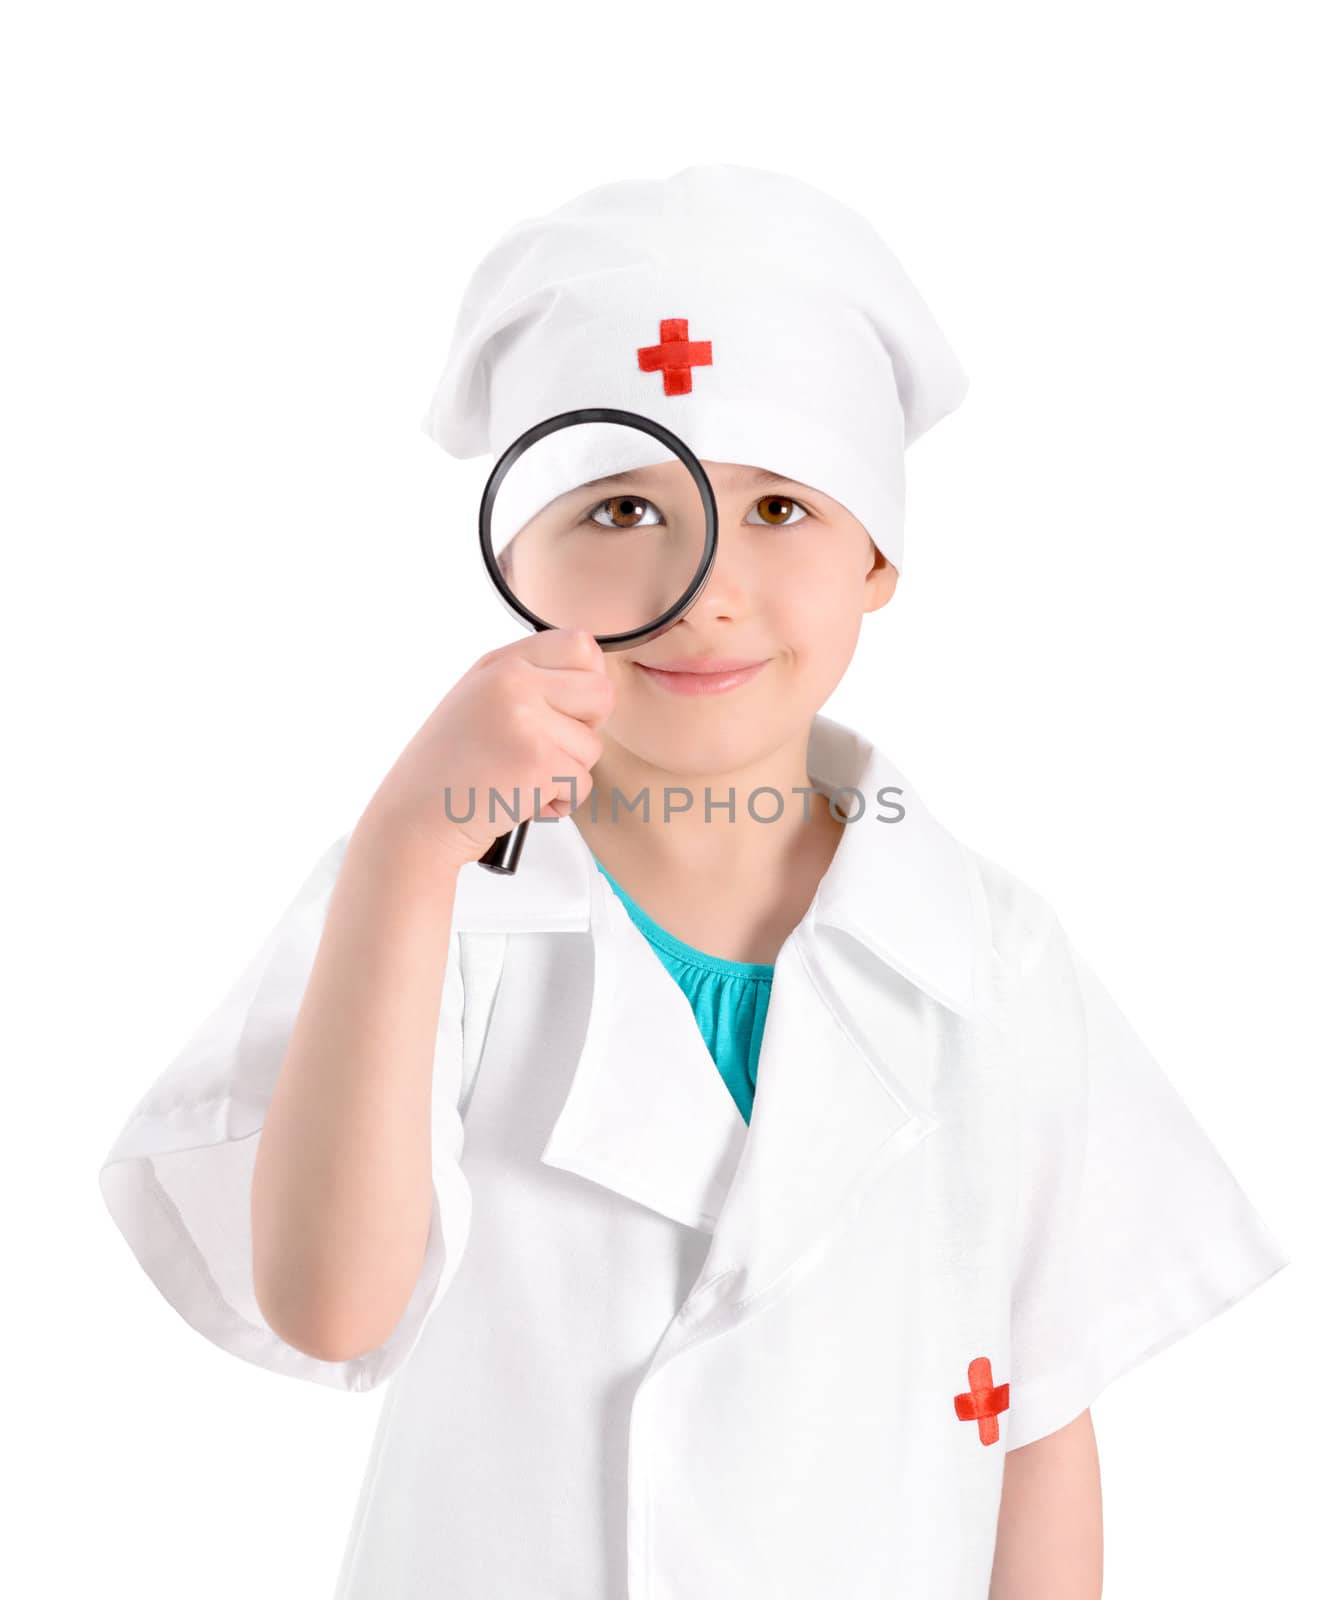 Smiling young nurse with magnifying glass by bloomua